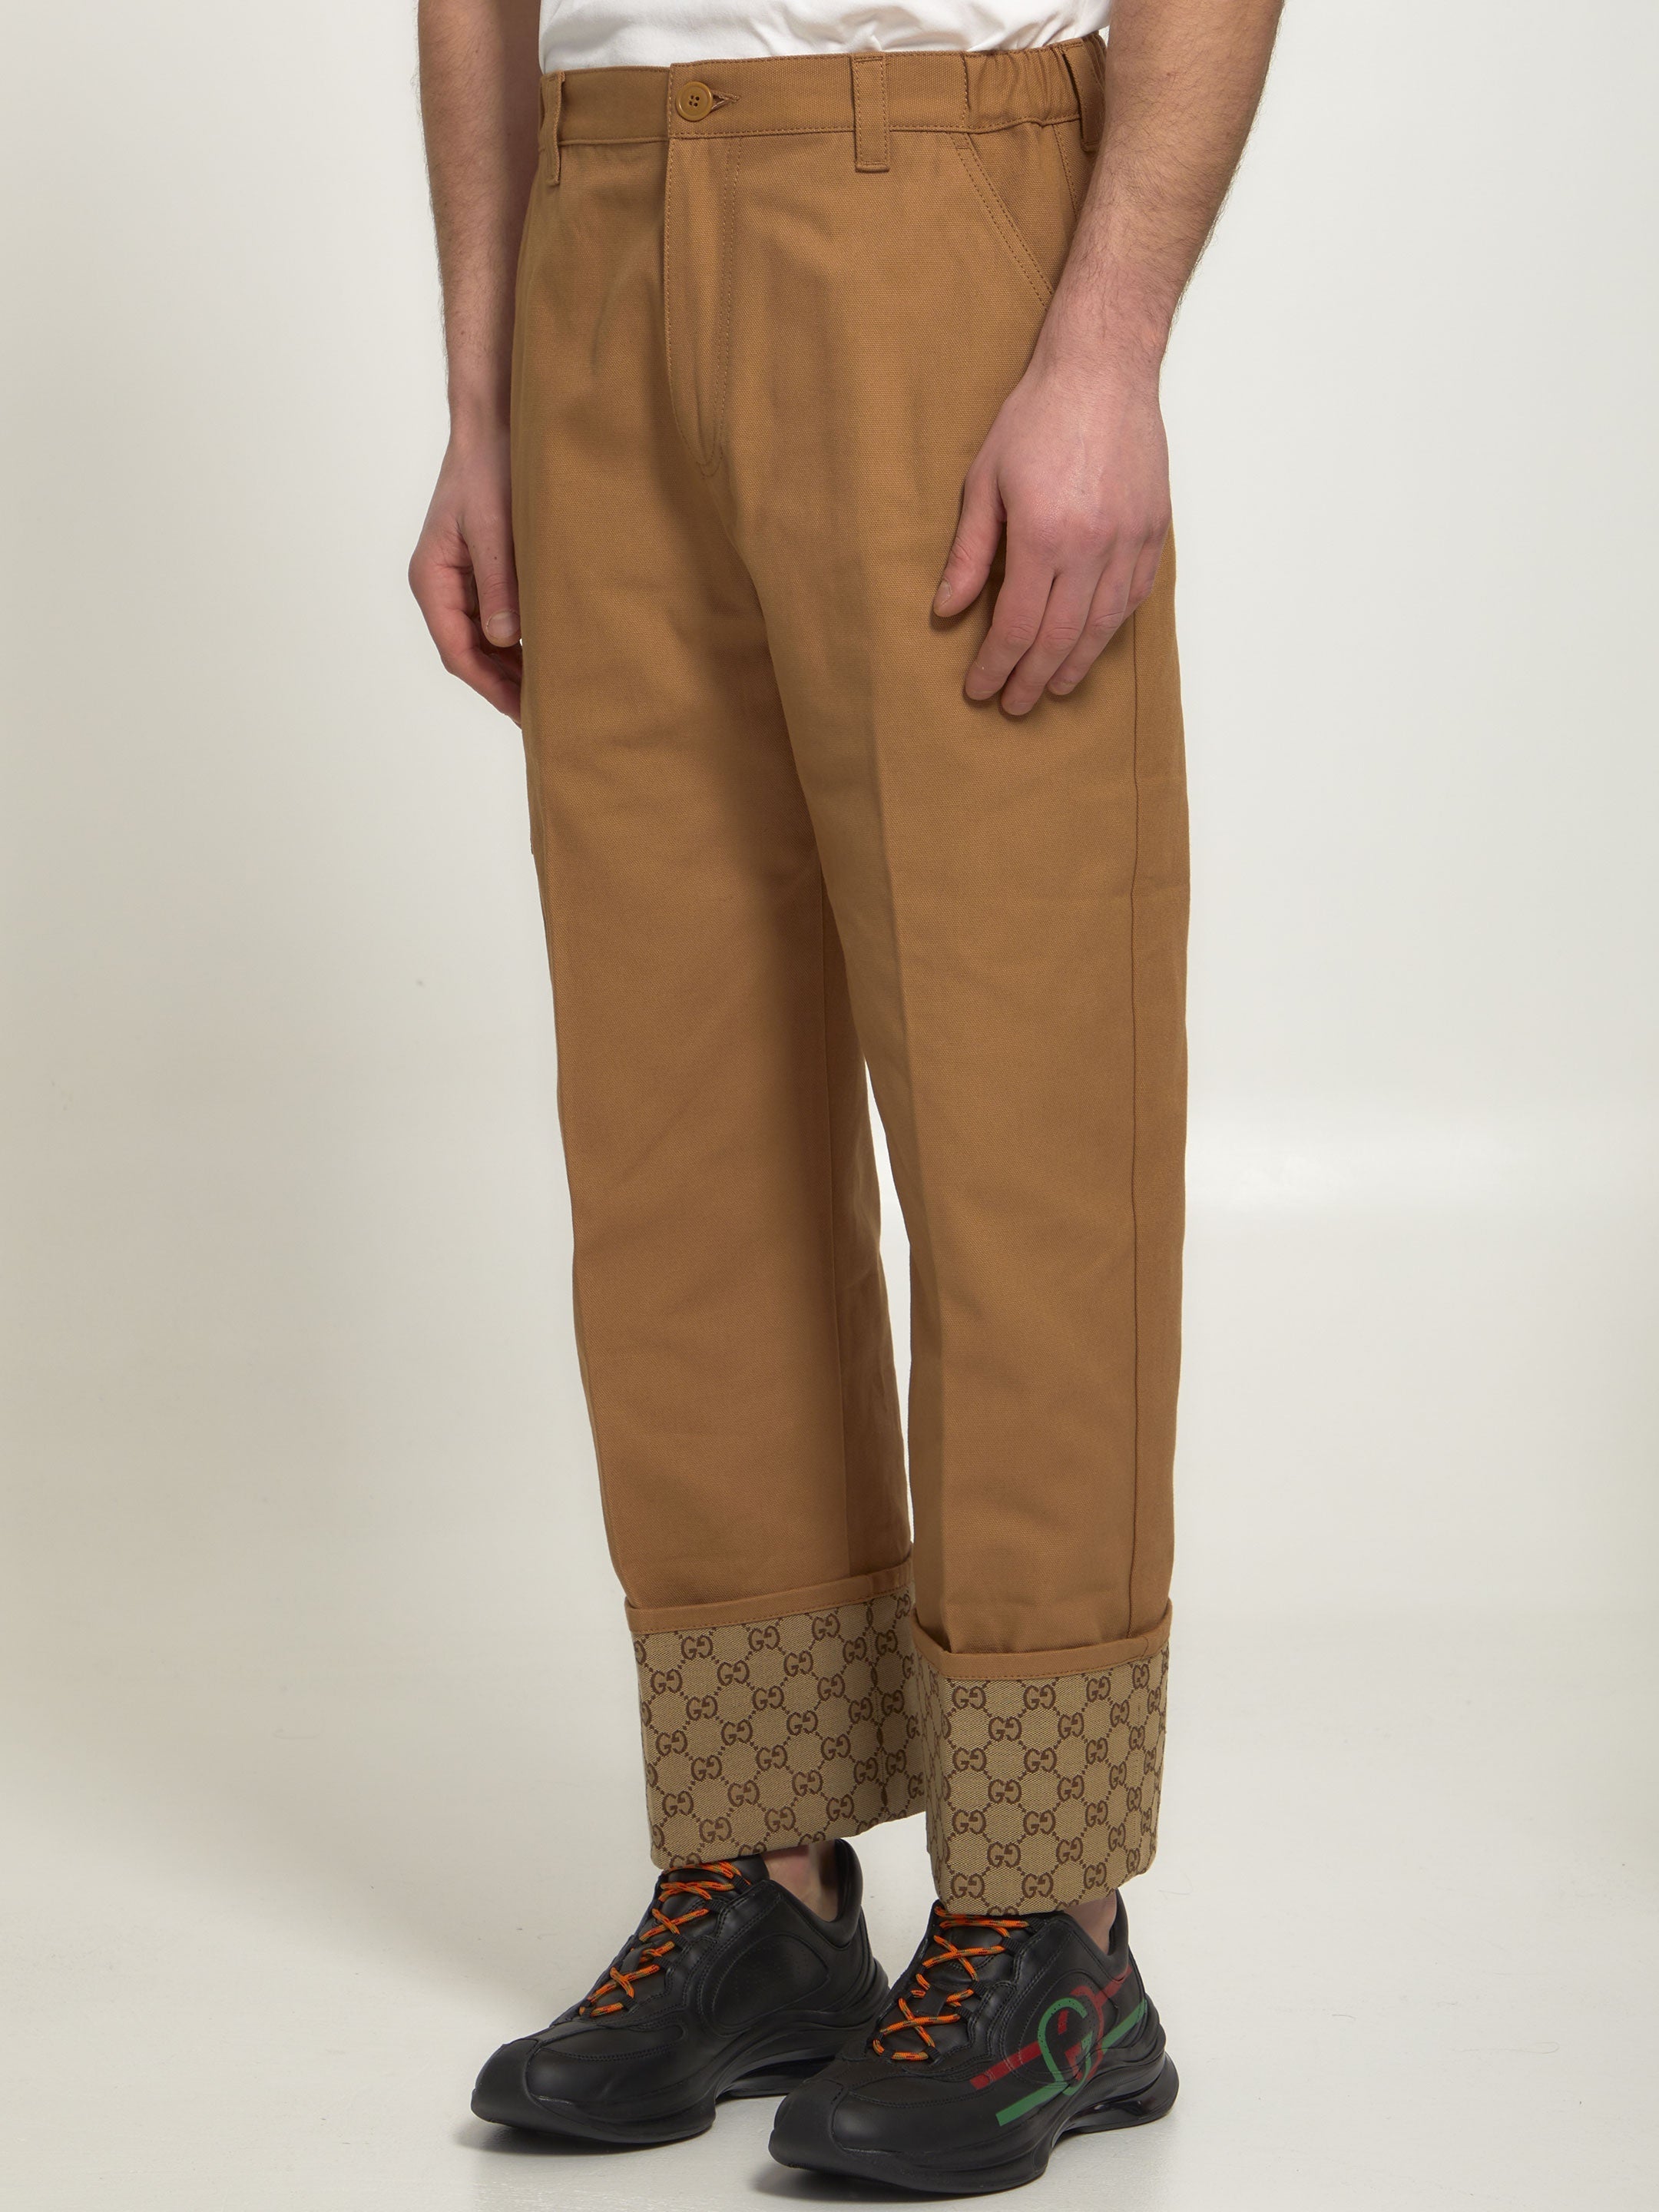 GUCCI-OUTLET-SALE-Beige-trousers-with-GG-cuff-Hosen-ARCHIVE-COLLECTION-2.jpg